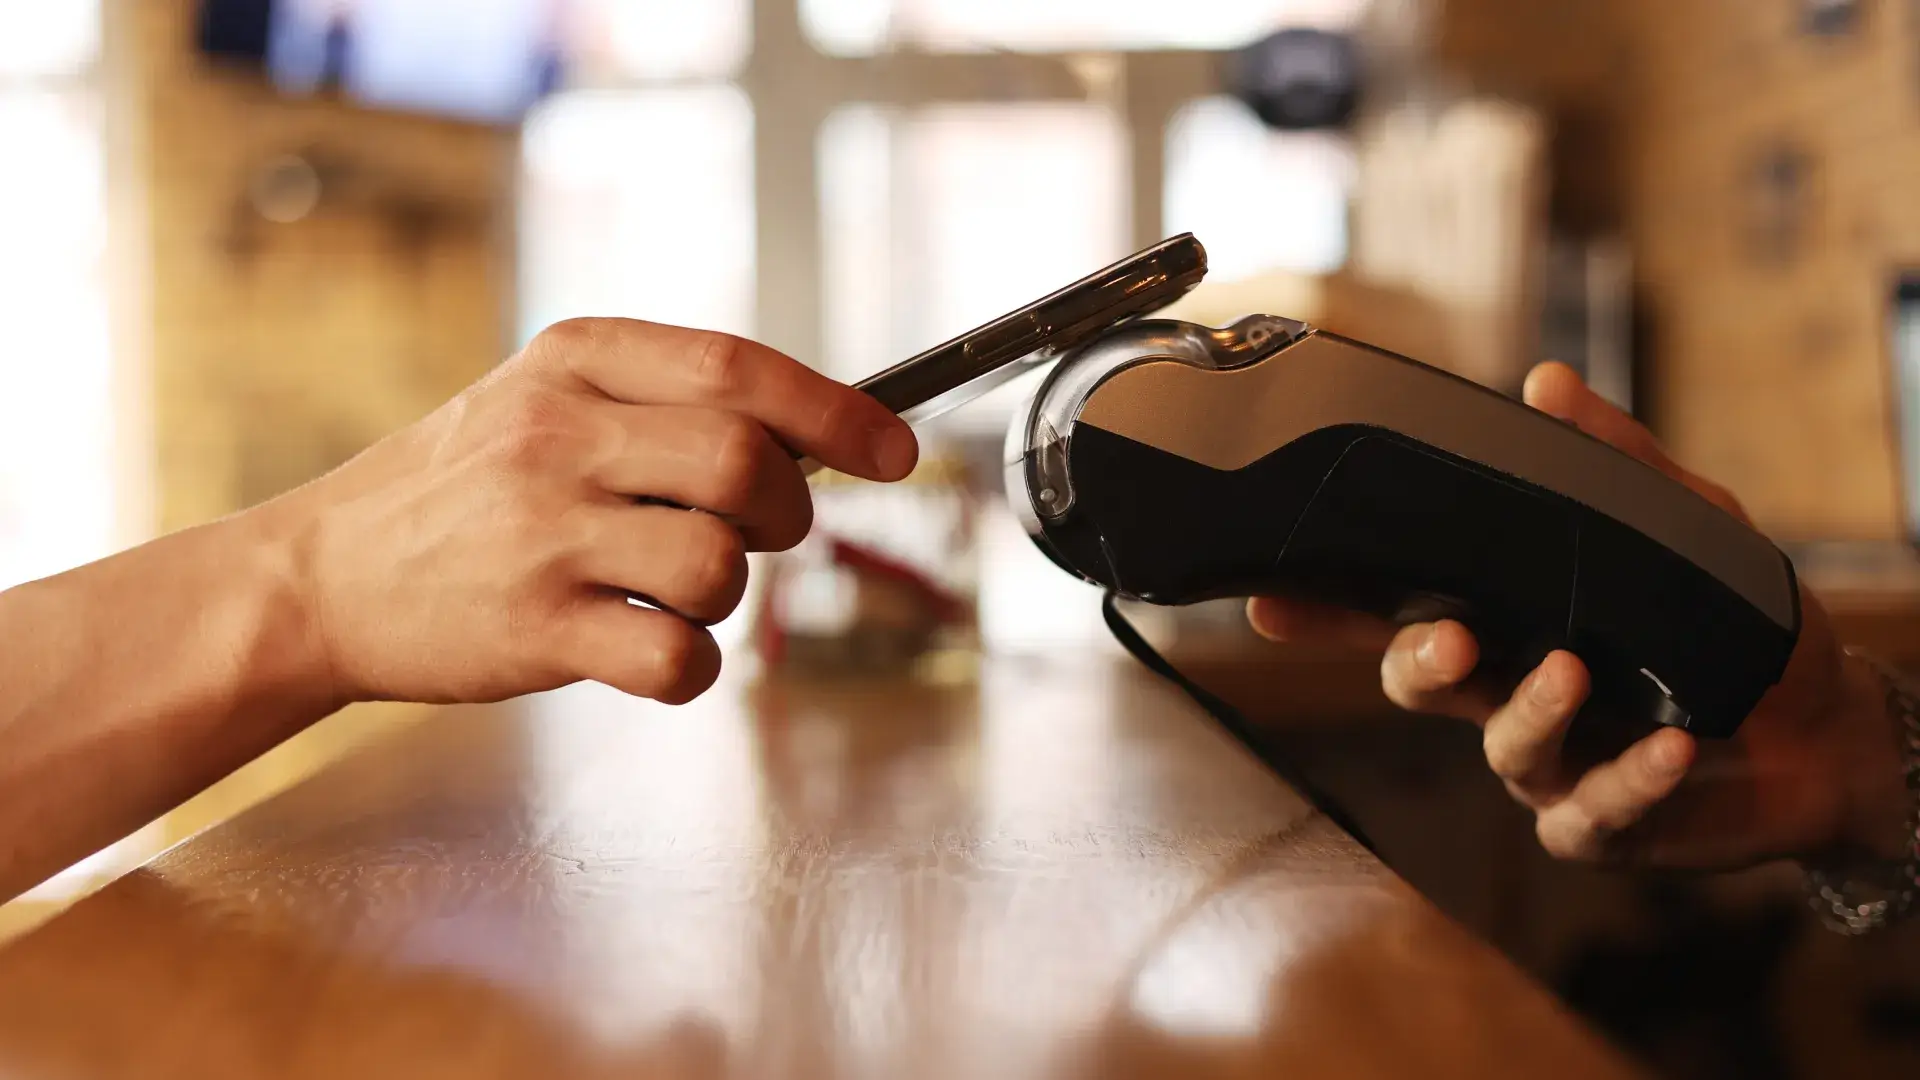 a customer puts their smartphone on a handheld device for contactless payment and automated digital receipt delivery